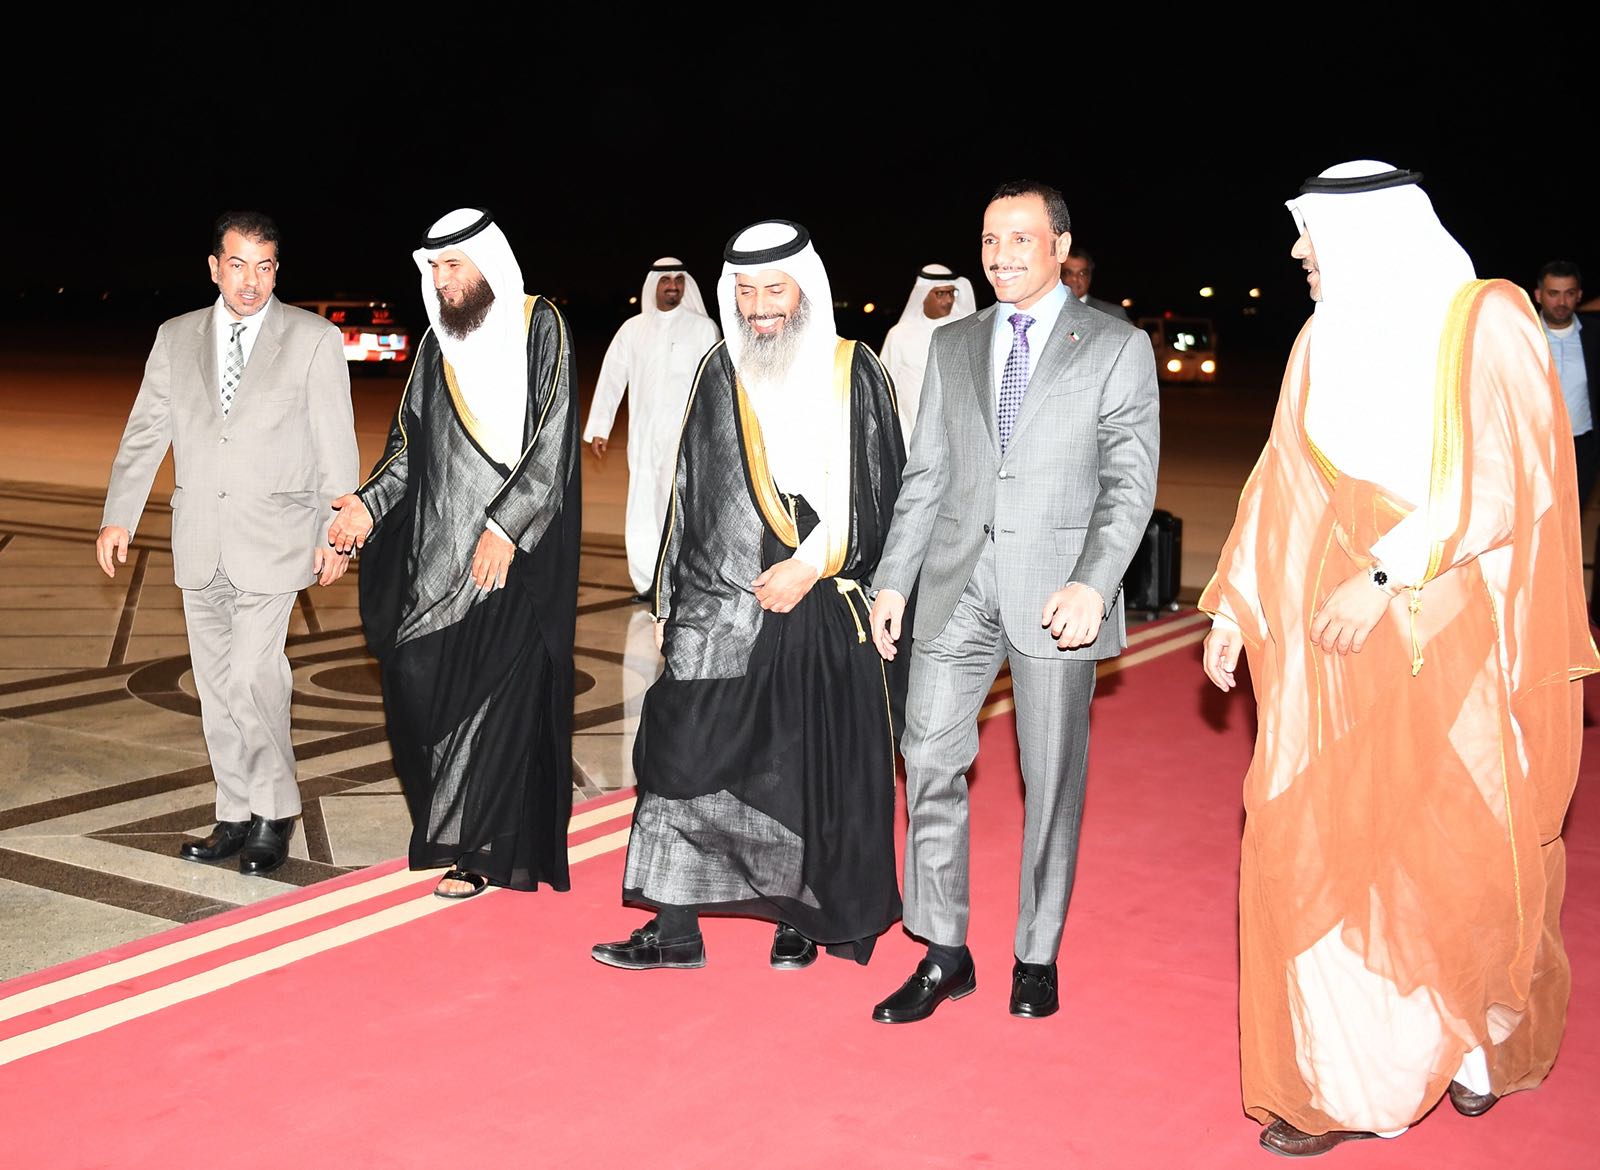 National Assembly Speaker Marzouq Al-Ghanim returns home after IPU meeting